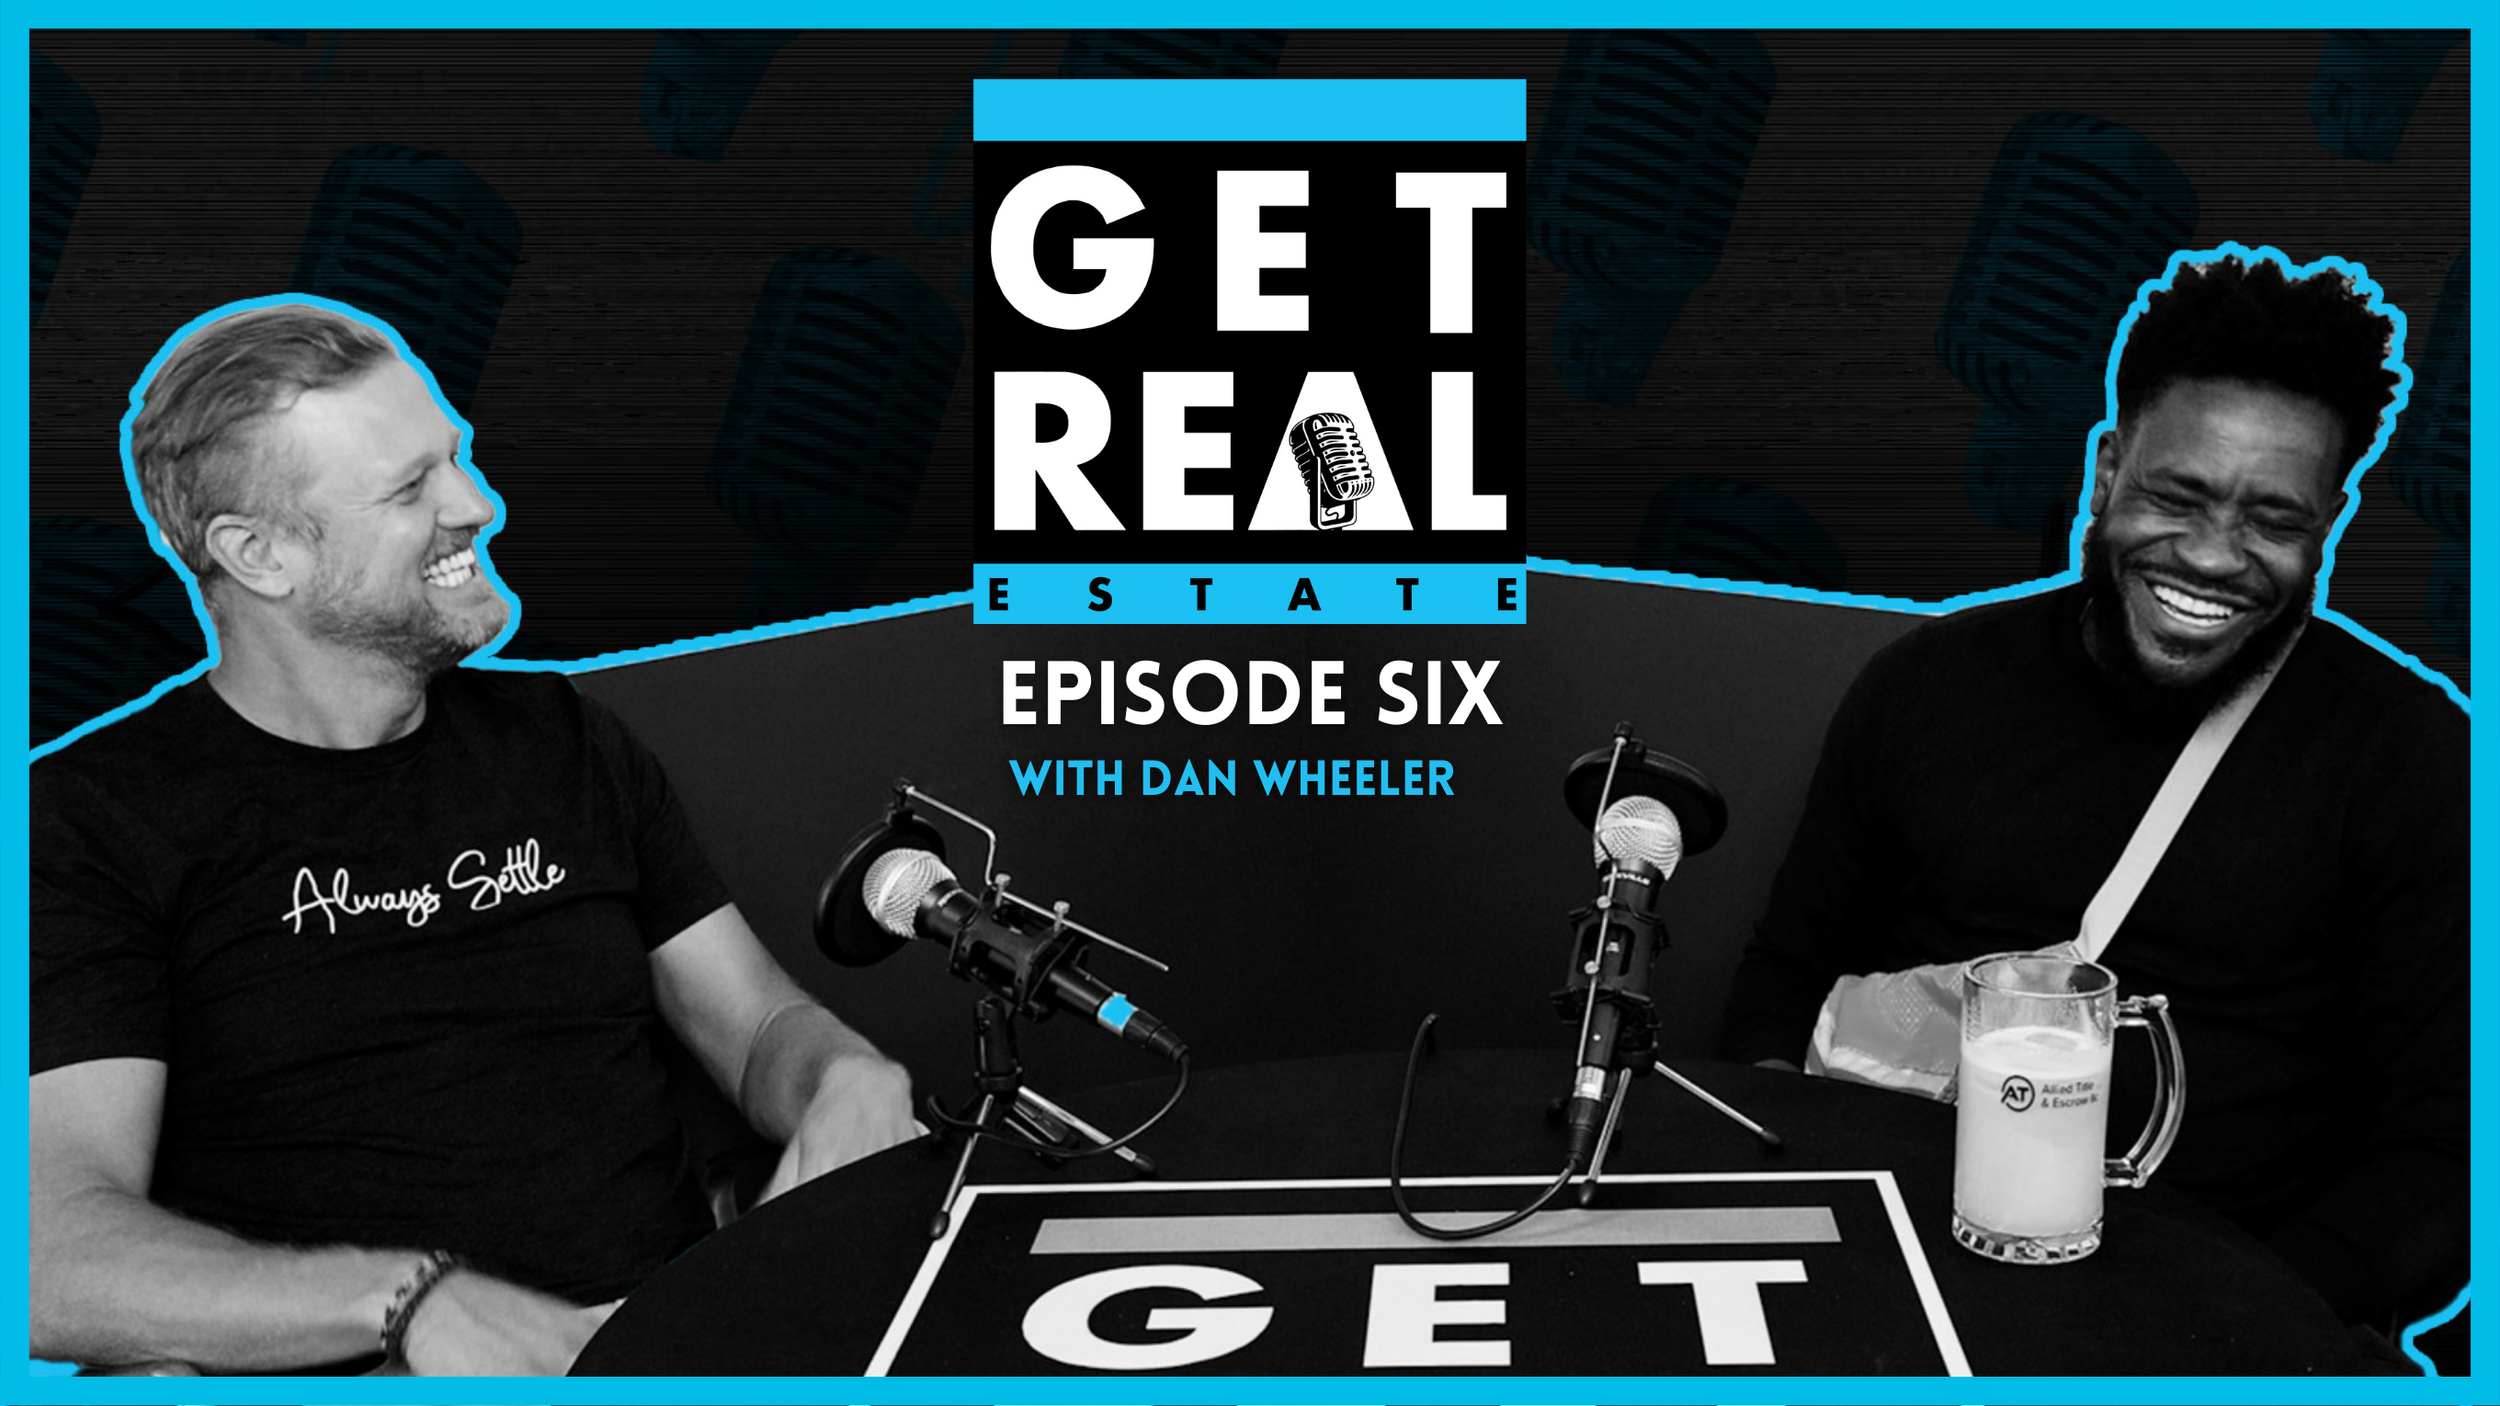 Get Real Estate - Podcast Intros (horizontal) (YouTube Thumbnail) (1).png